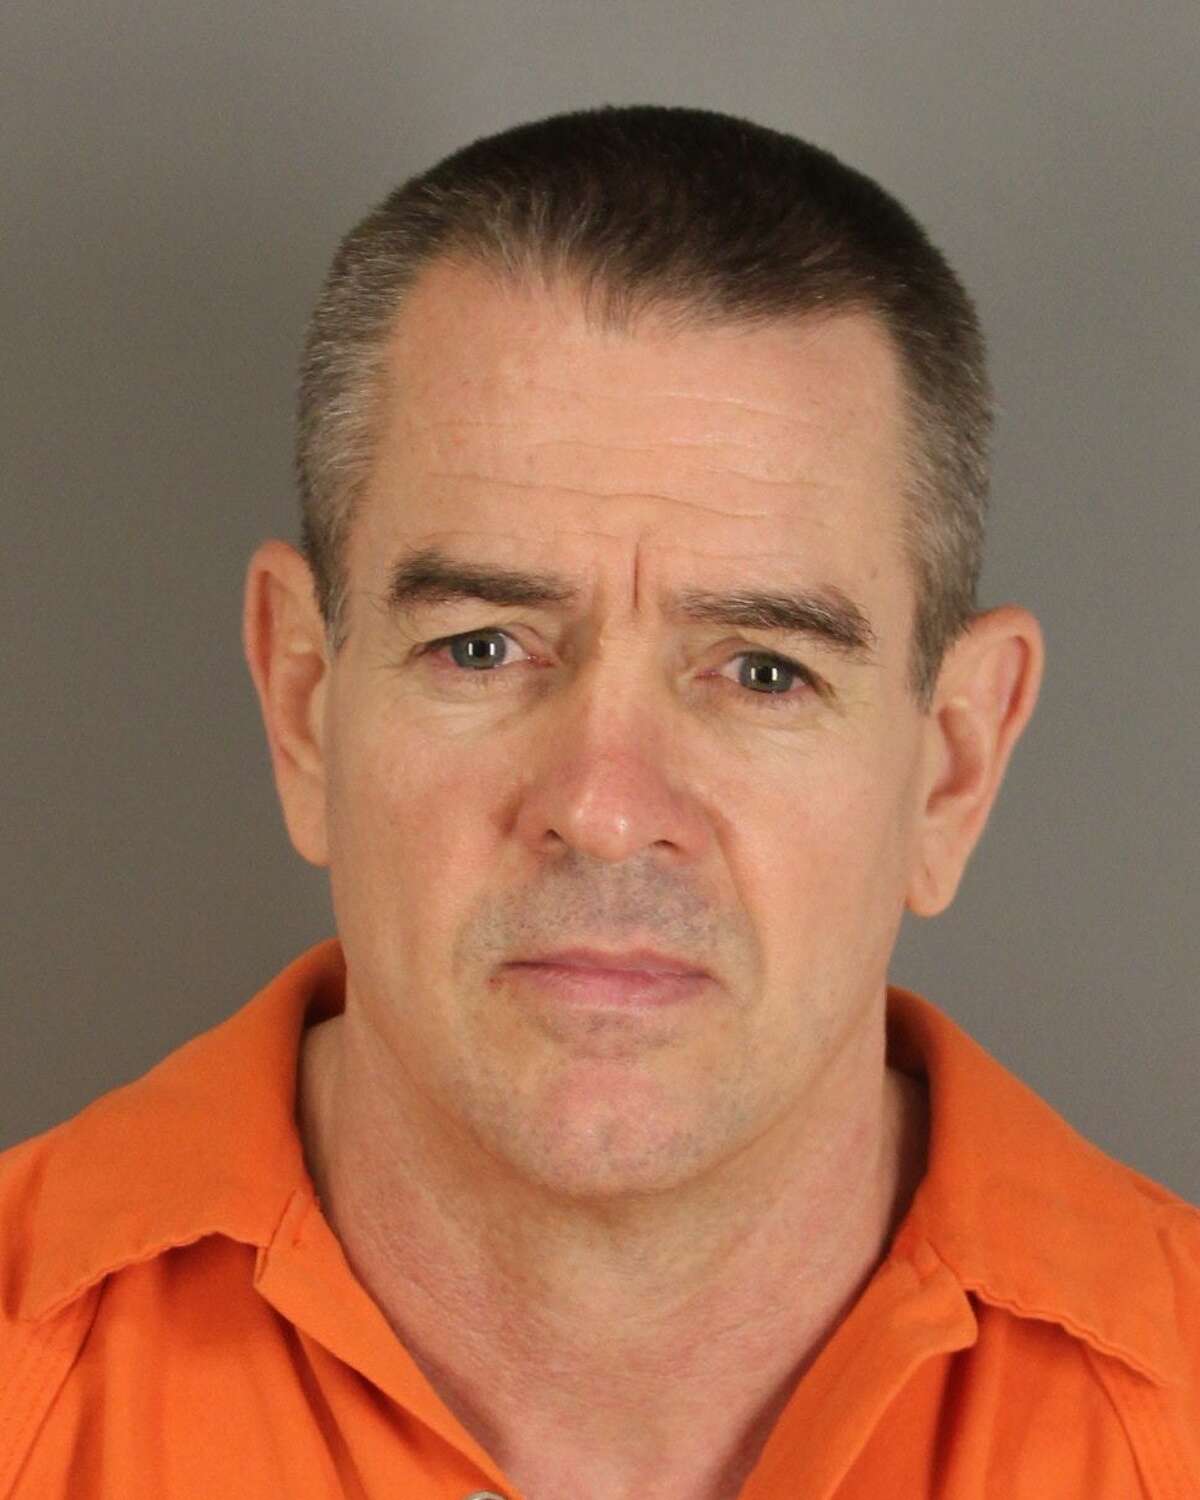 Lee Andrew Widner, 51 DWI 3rd Arresting Department: Jefferson County Sheriff's Office